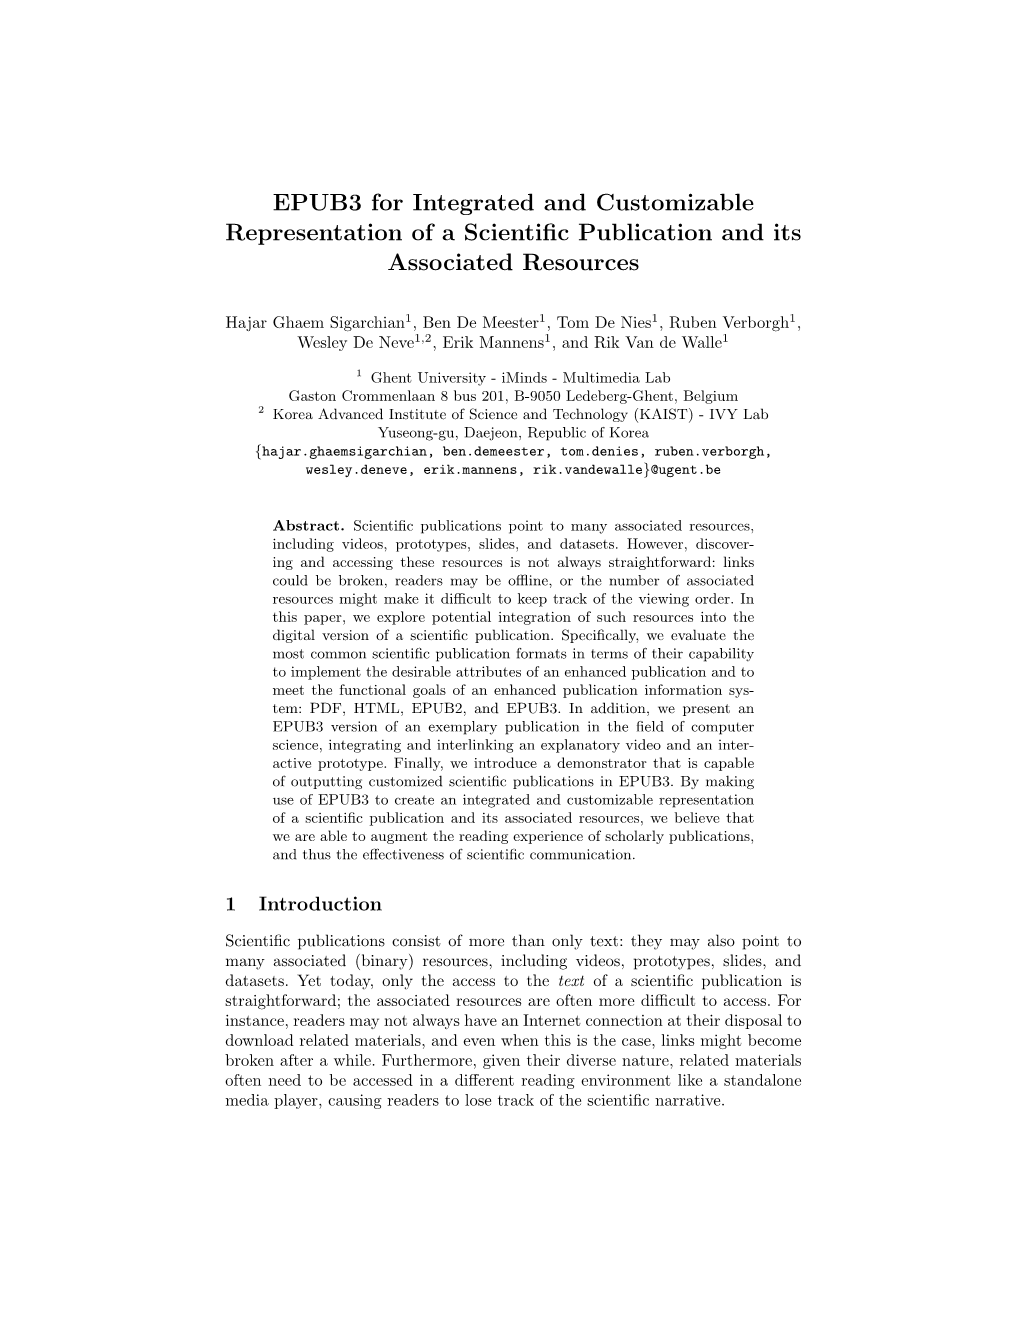 EPUB3 for Integrated and Customizable Representation of a Scientiﬁc Publication and Its Associated Resources